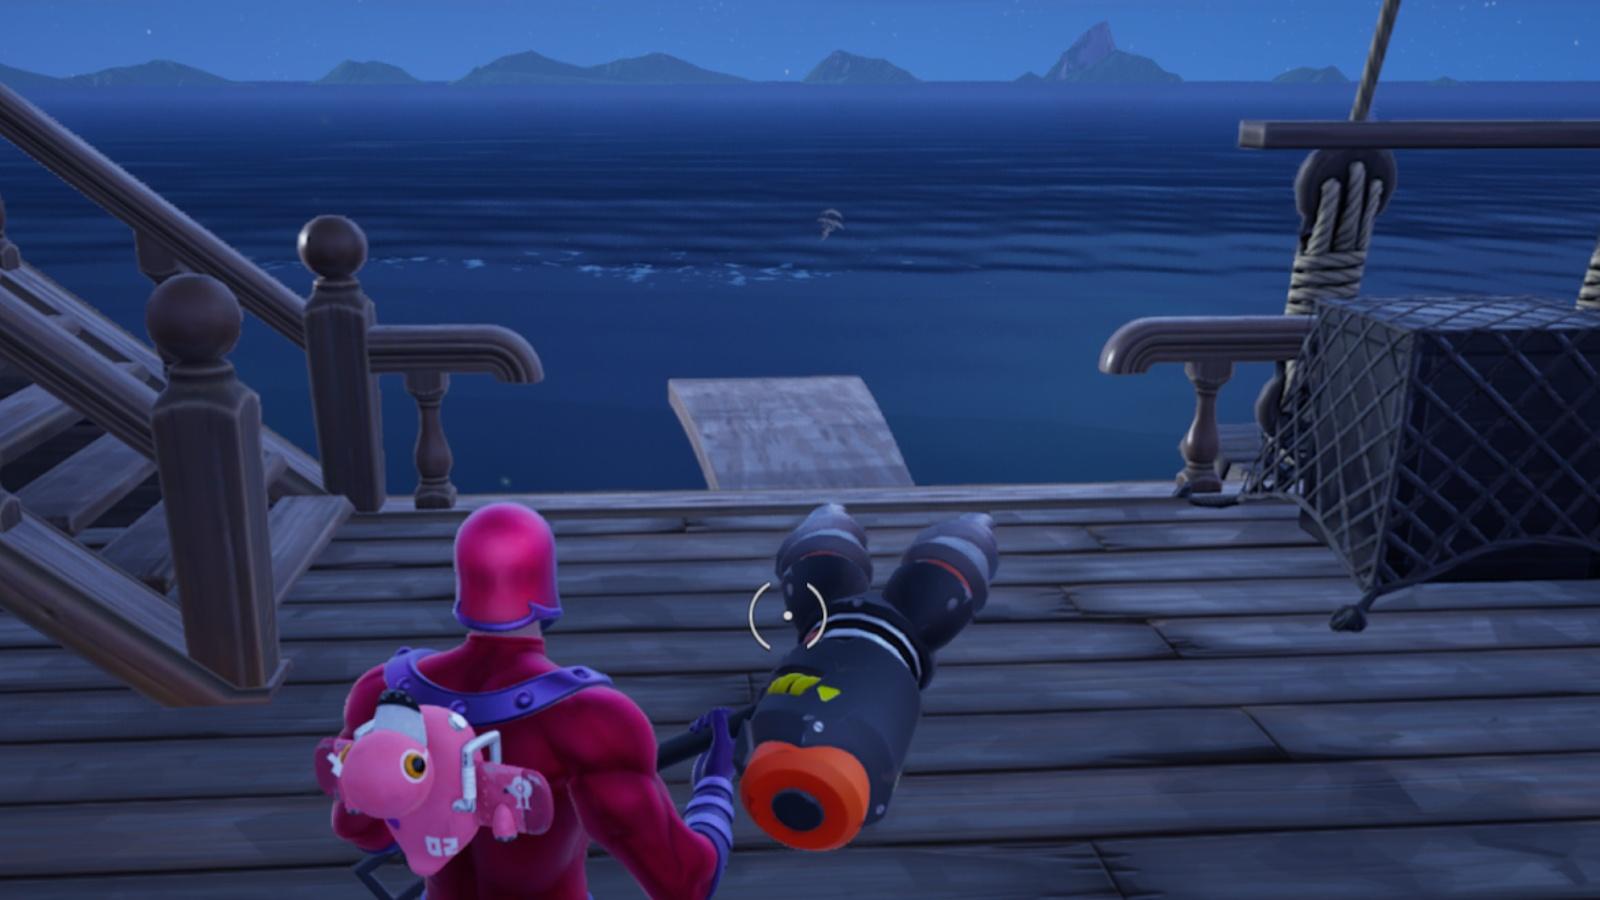 A screenshot featuring one of the Fortnite x Pirates of the Caribbean challenges.